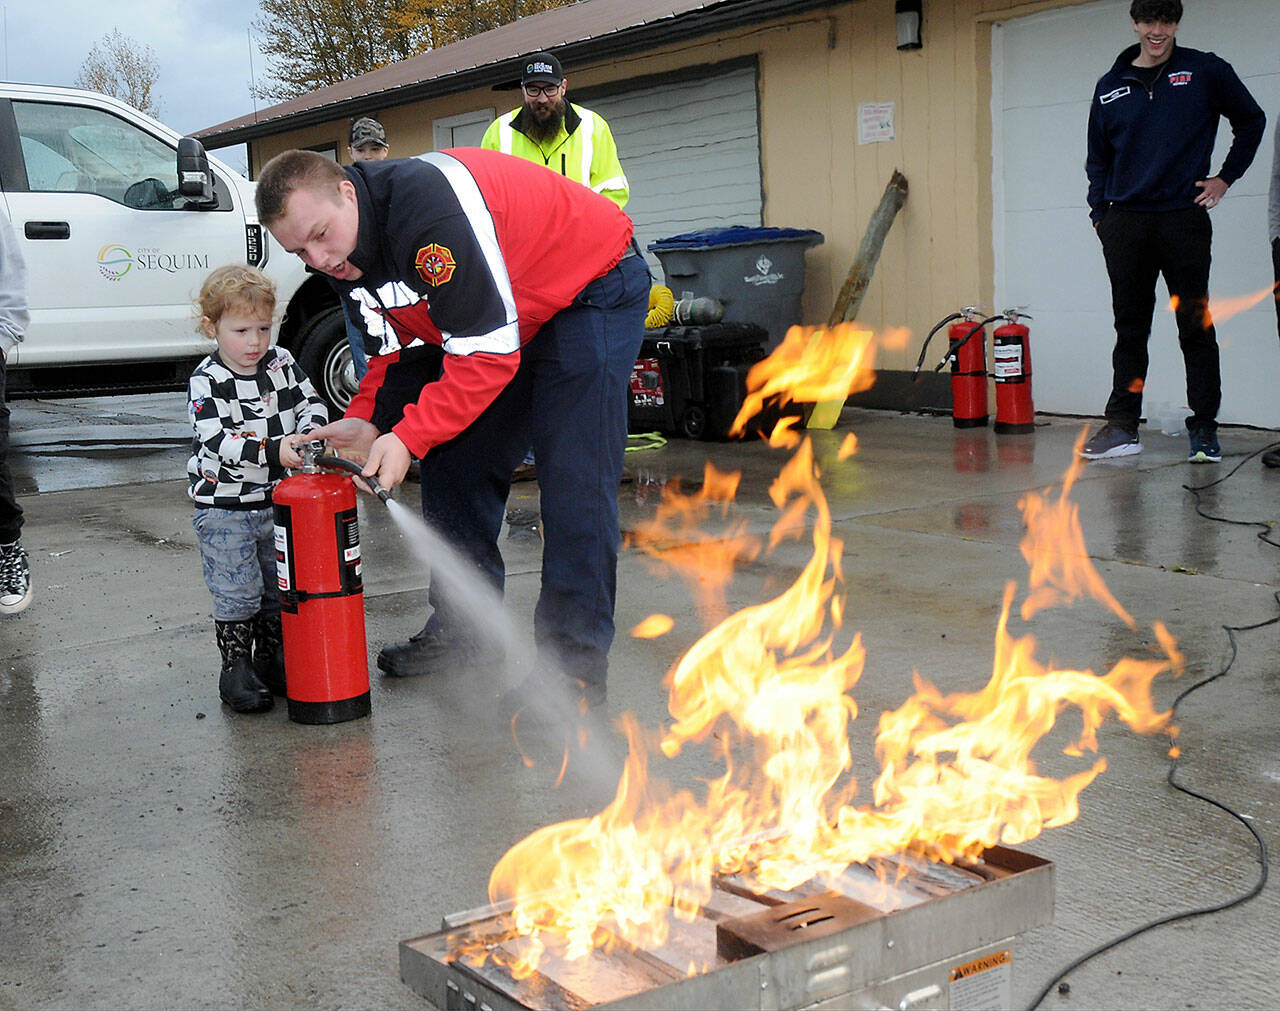 Beau Rossi, 2, of Sequim gets assistance from Clallam County Fire District 3 firefighter/paramedic Hayden Pyle with extinguishing an intentional propane fire during Saturday’s Public Safety and Information Fair at Carrie Blake Park in Sequim. The event, organized by Fire District 3 and the Community Emergency Response Team, featured a variety of exhibits and displays from numerous public safety and community service agencies, as well as workshops and children’s activities. (Keith Thorpe/Peninsula Daily News)